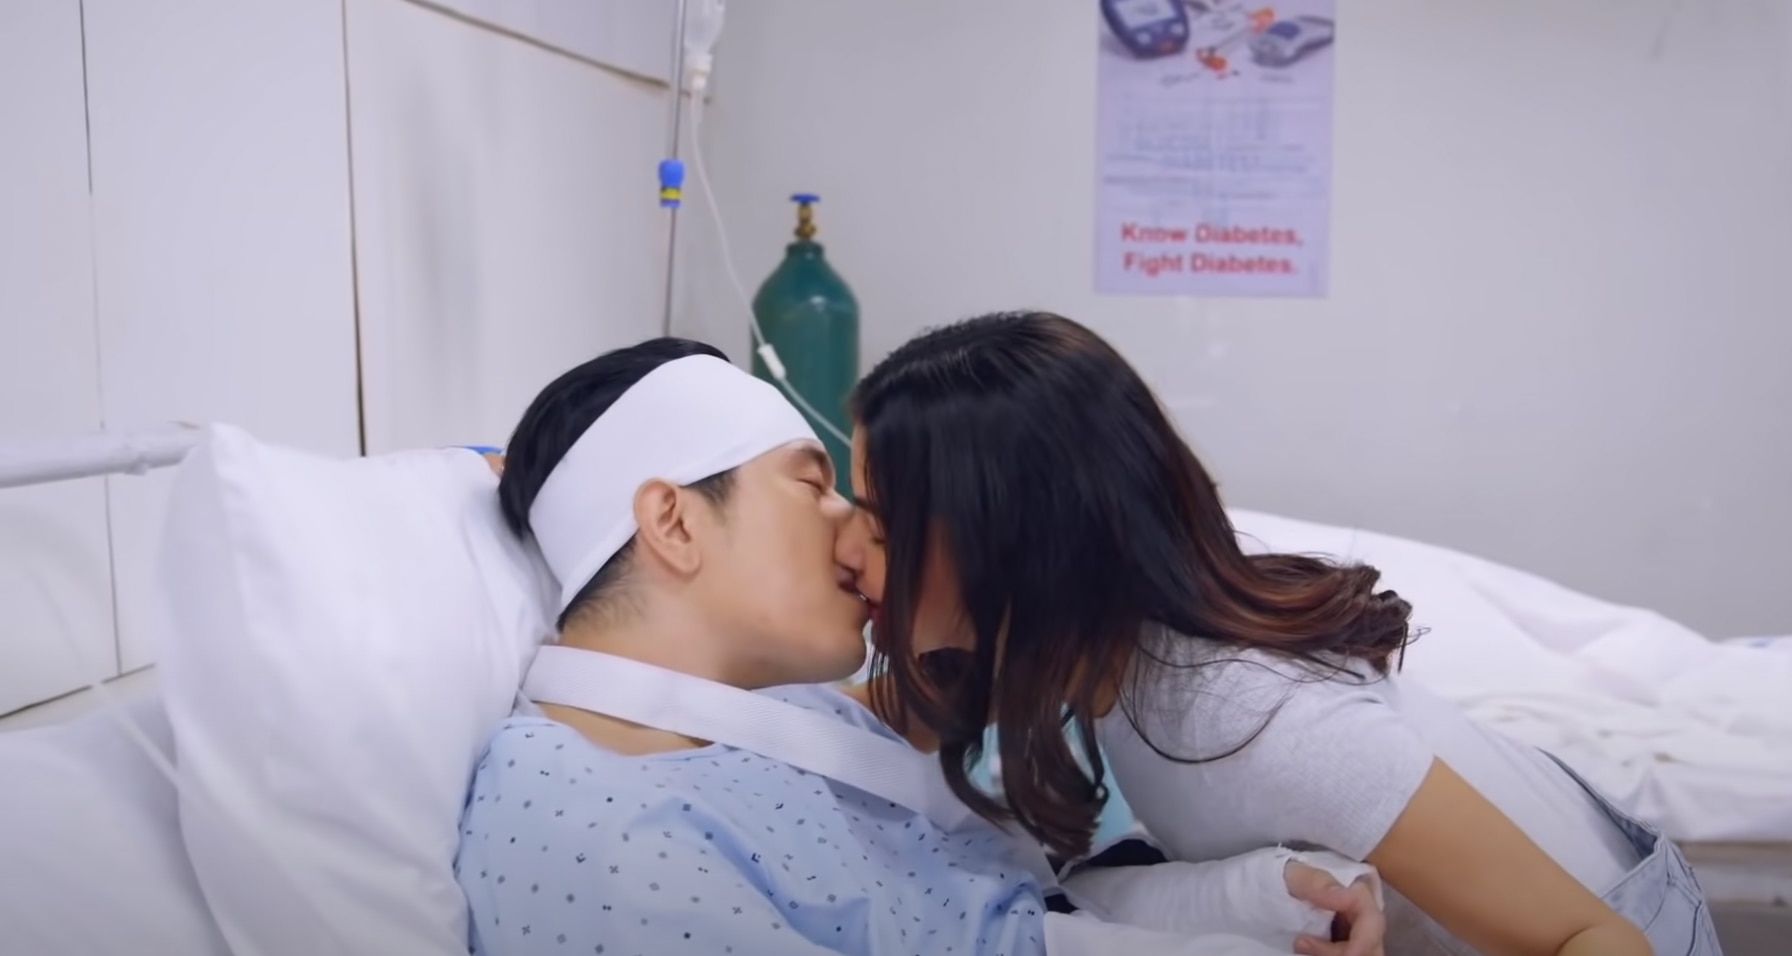 Andrei and Camille (Paulo Avelino and Janine Gutierrez) share a kiss